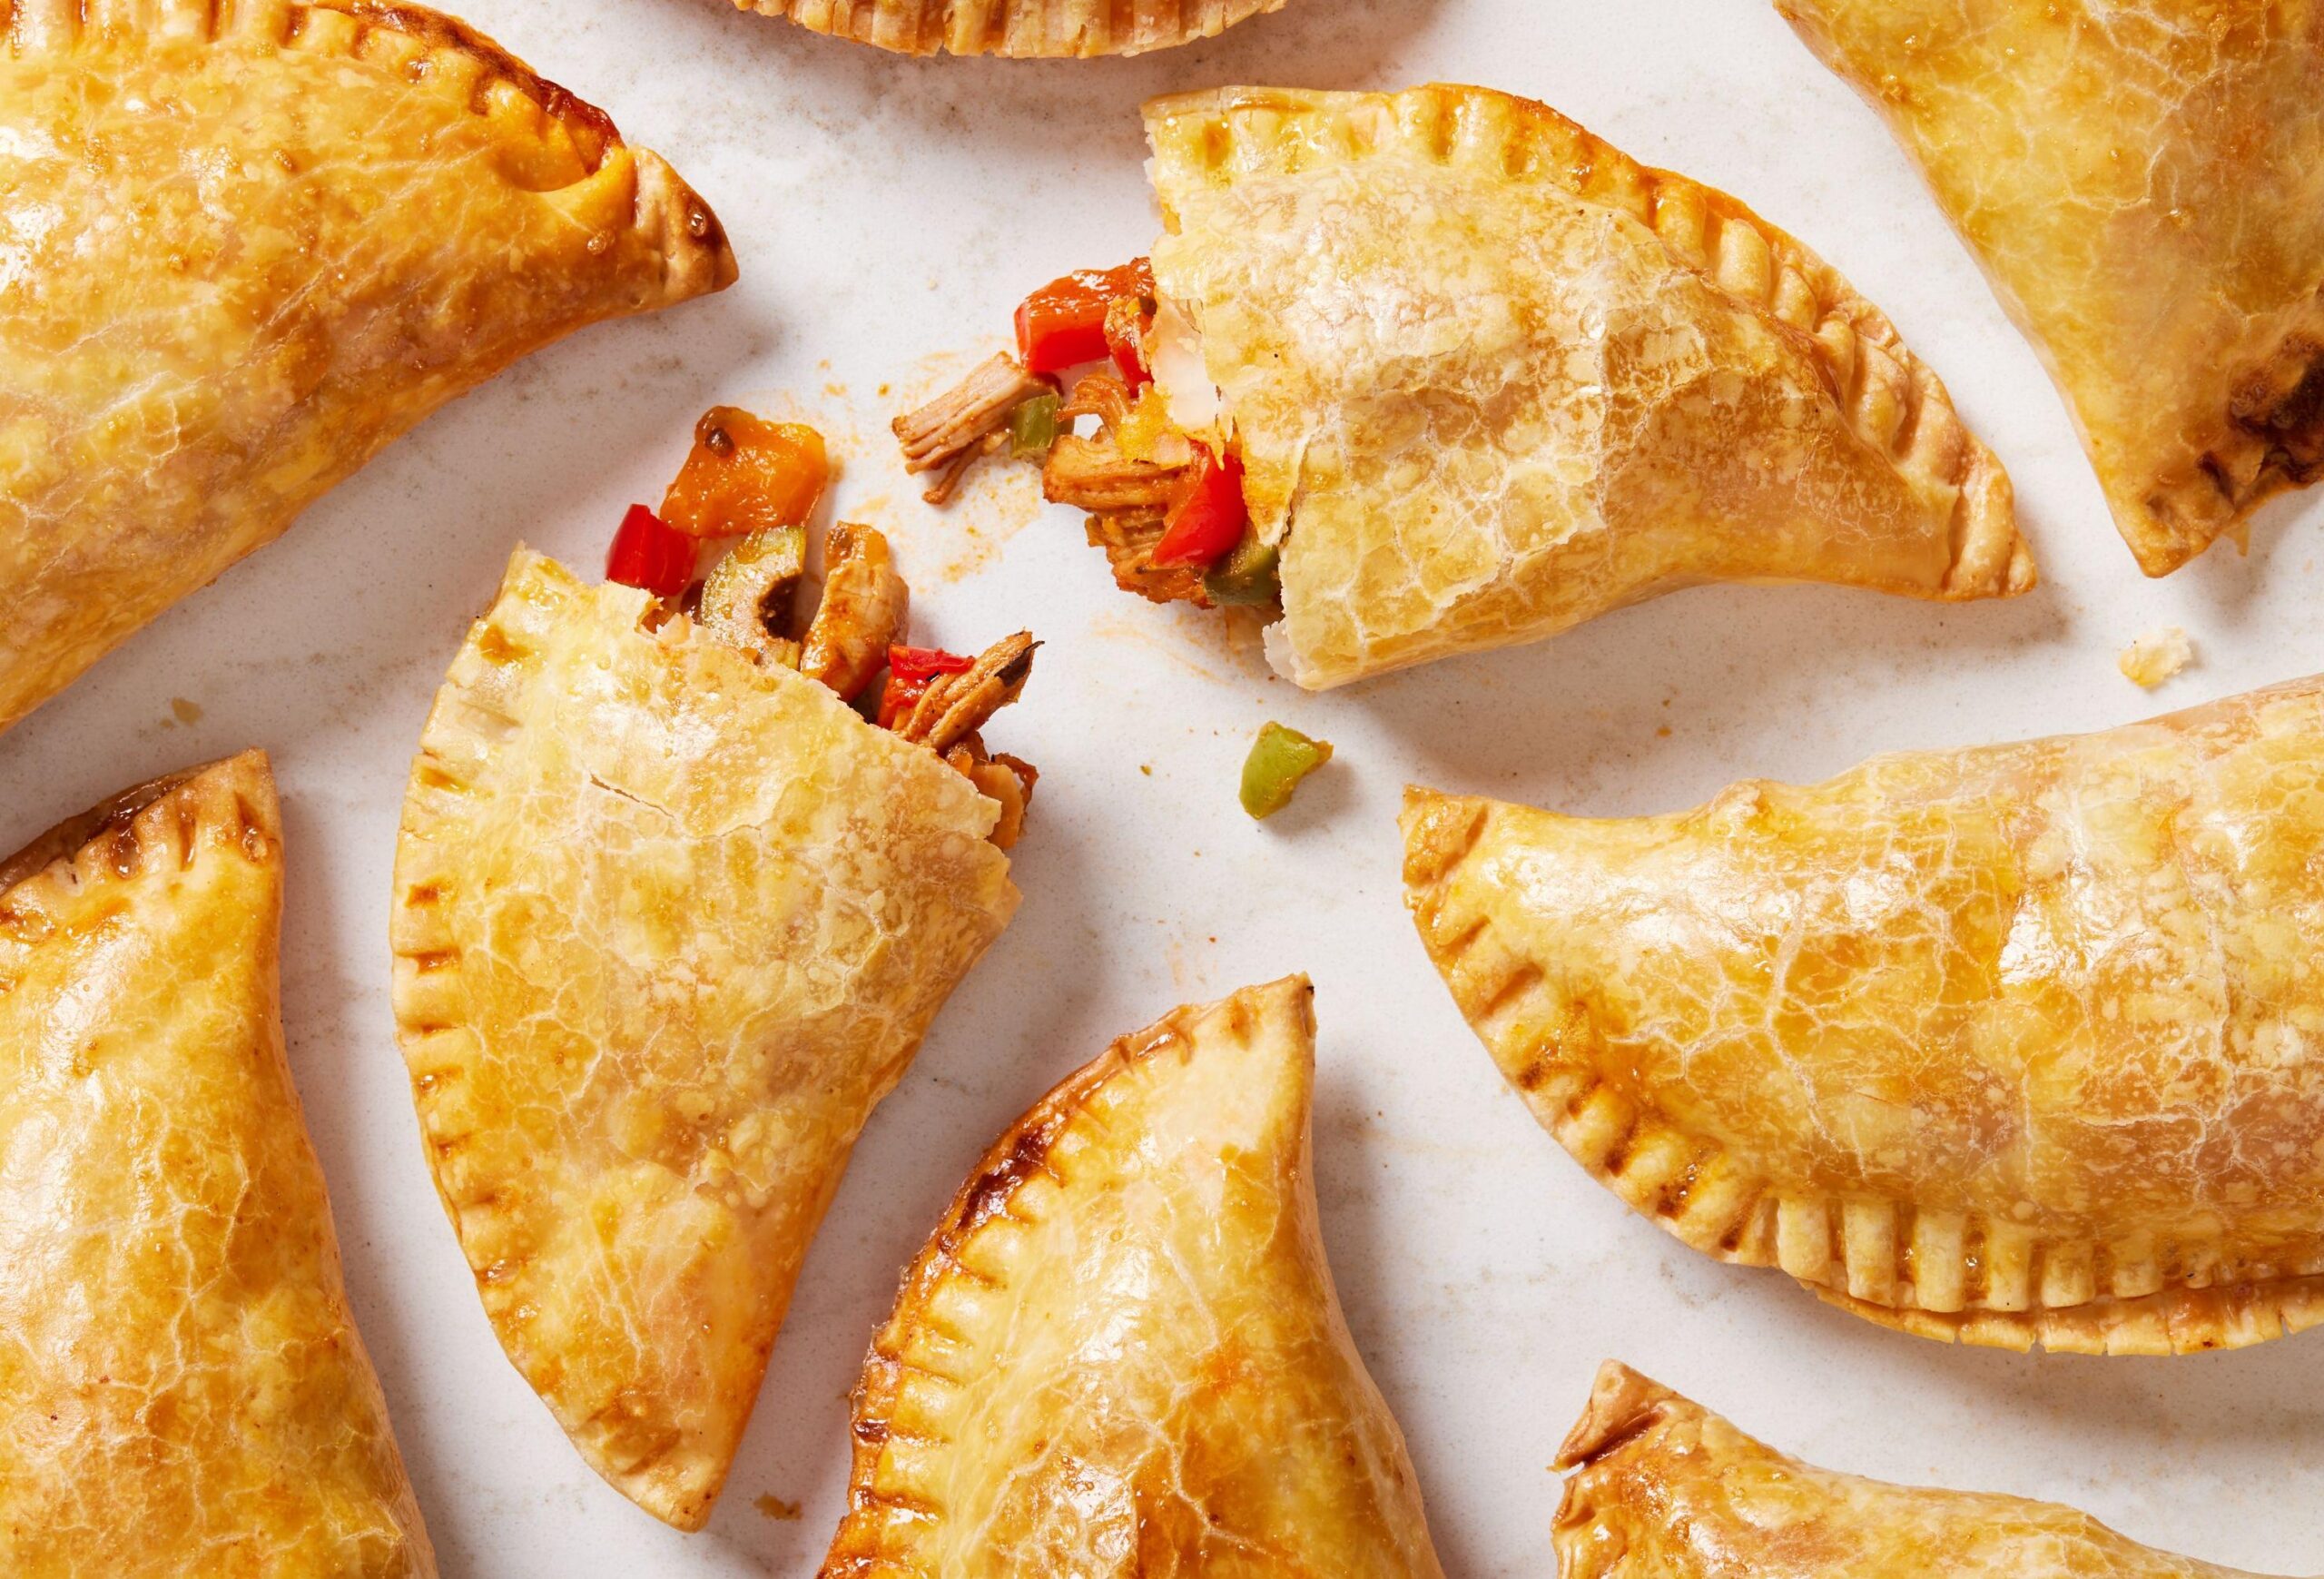  Don't be afraid to dip these hot and fresh empanadas into your favorite sauce!